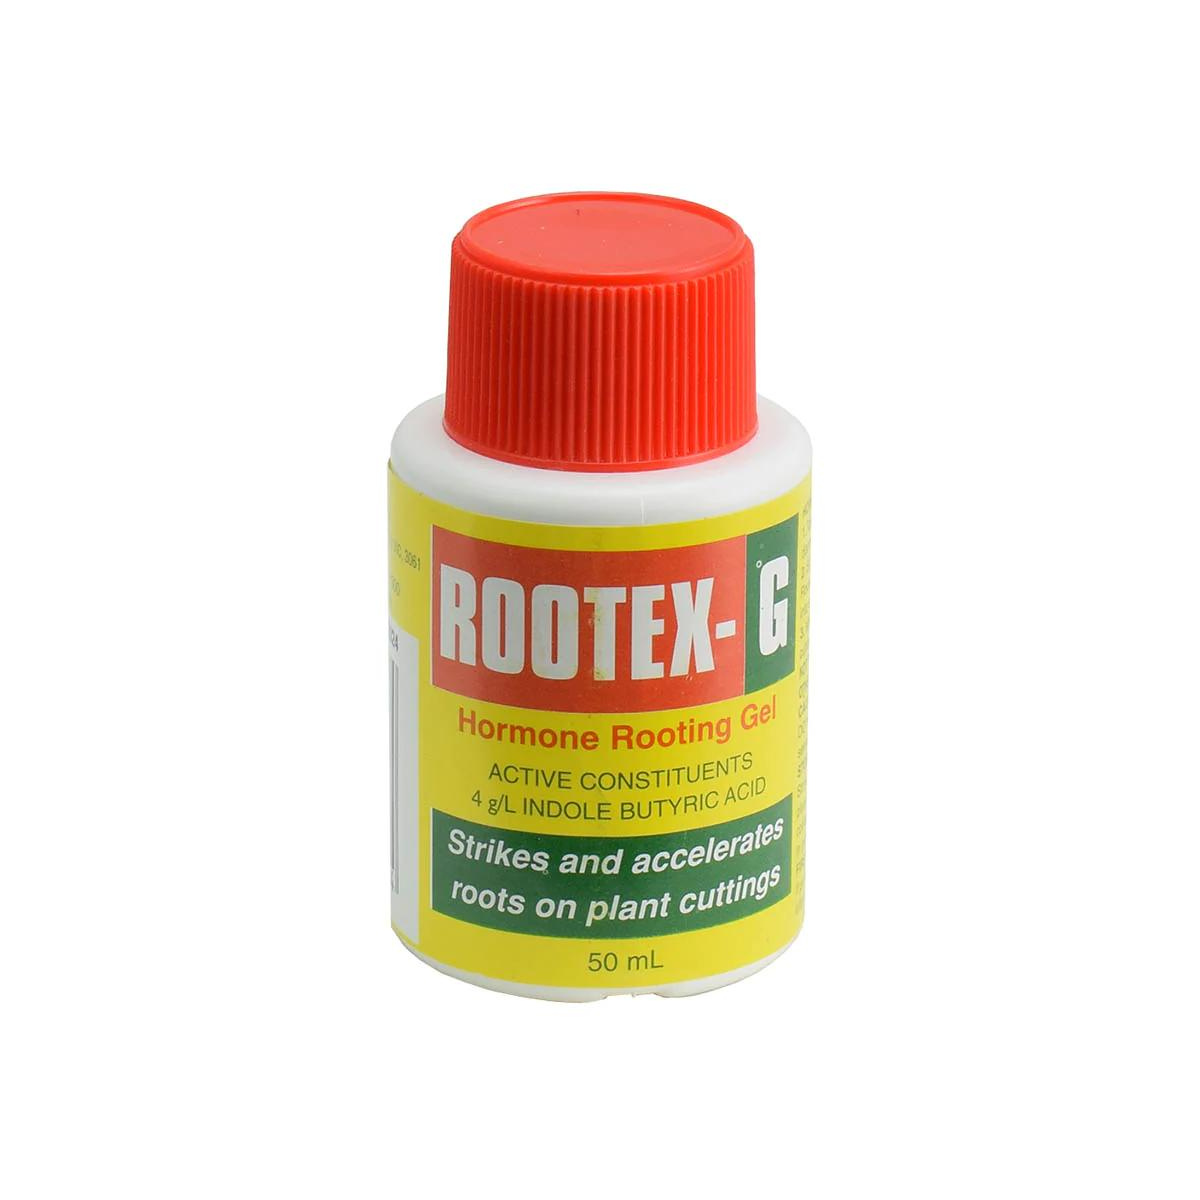 Rootex-G Plant Hormone Rooting Gel for Cutting Propagation